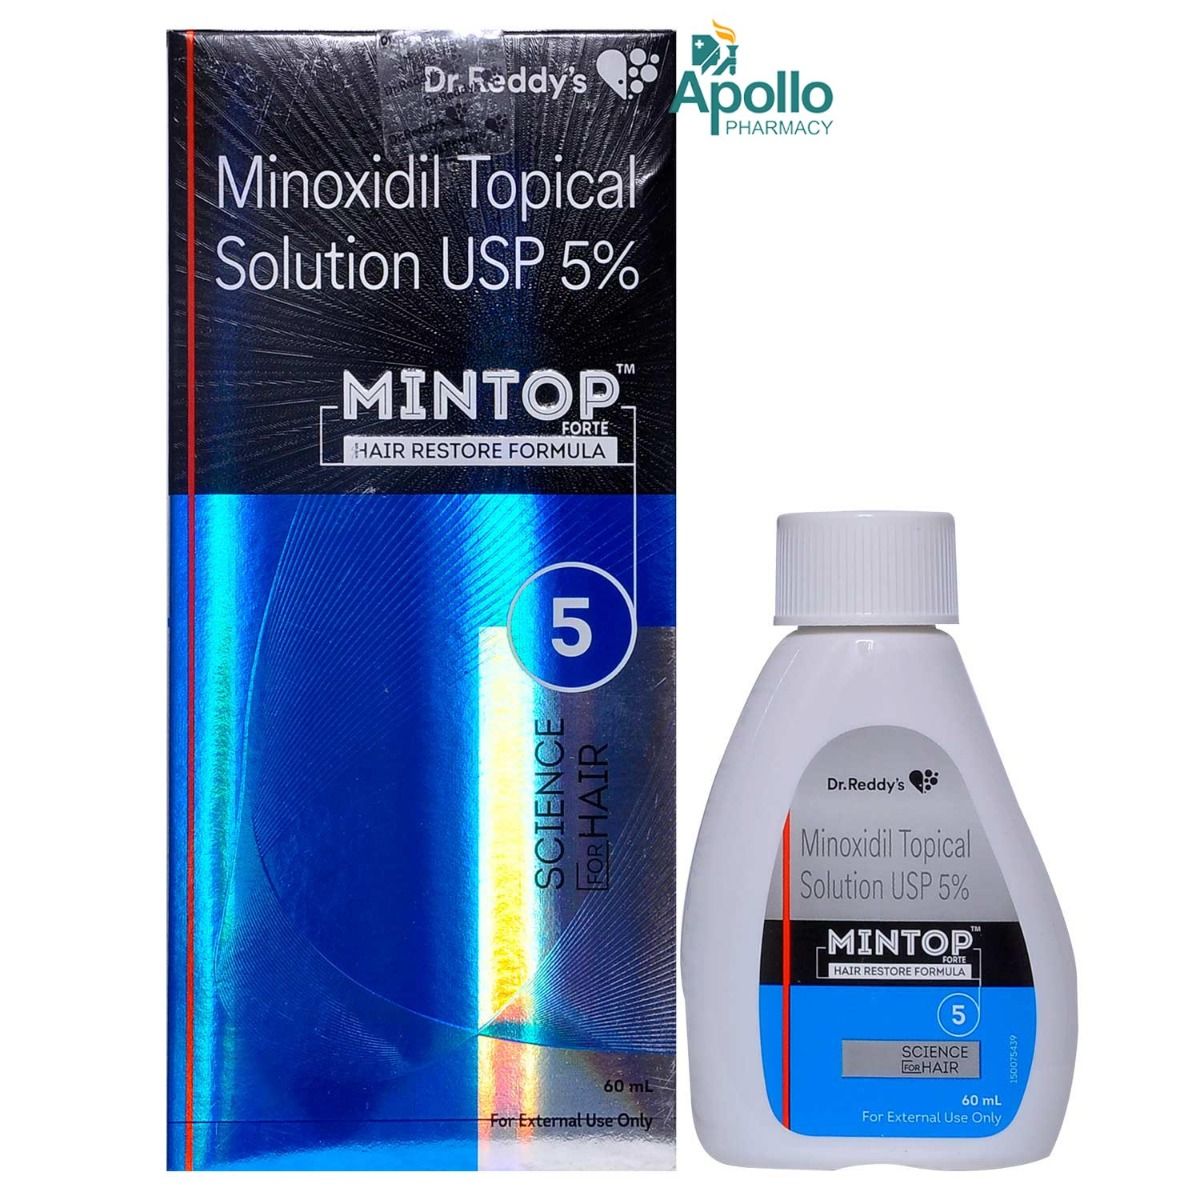 Mintop Forte 5% Solution, 60 ml Price, Uses, Side Effects, Composition -  Apollo Pharmacy